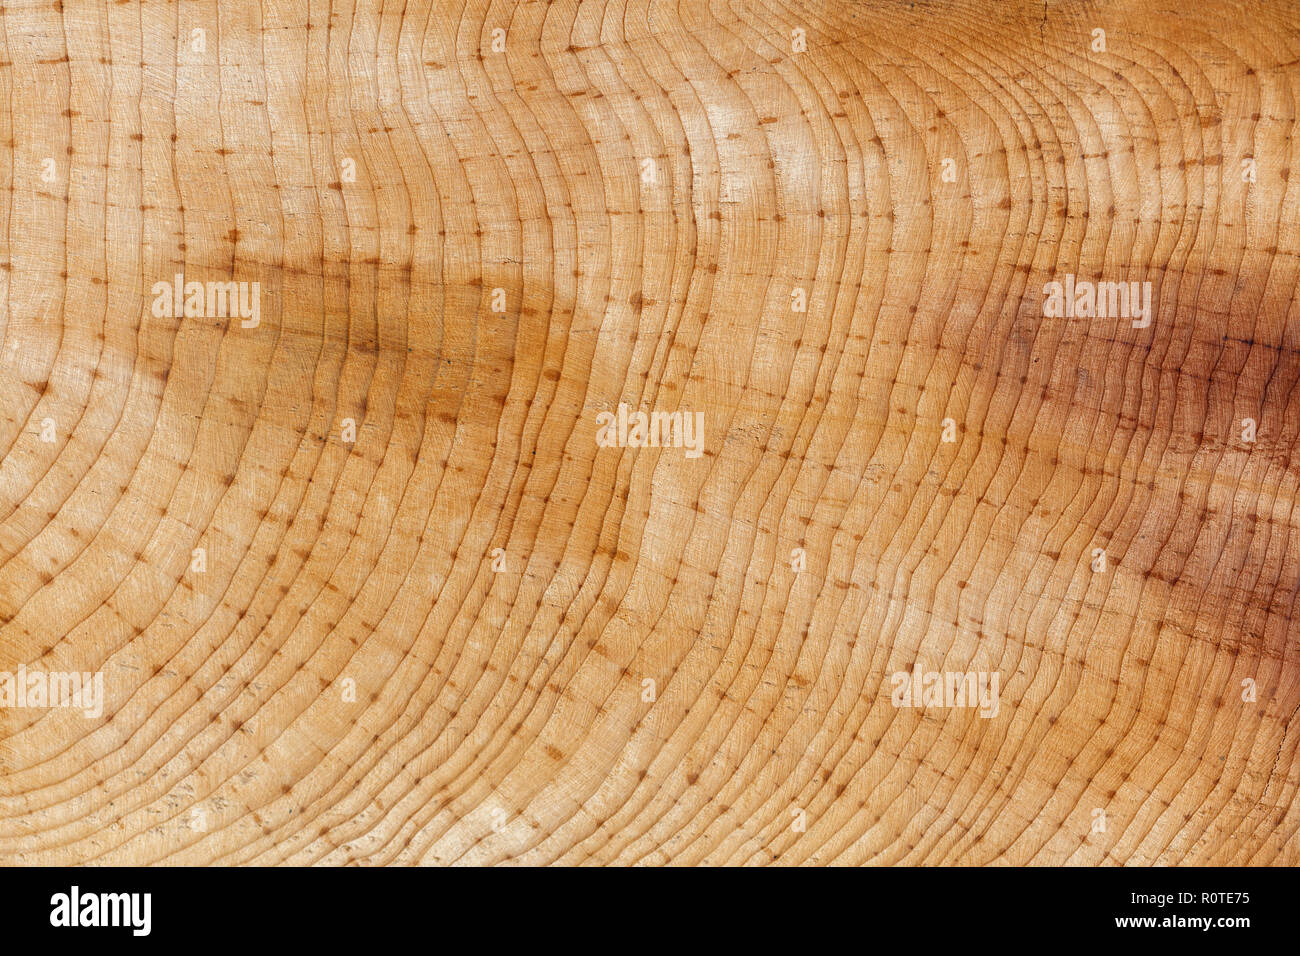 The wood ring texture background , close up. Stock Photo